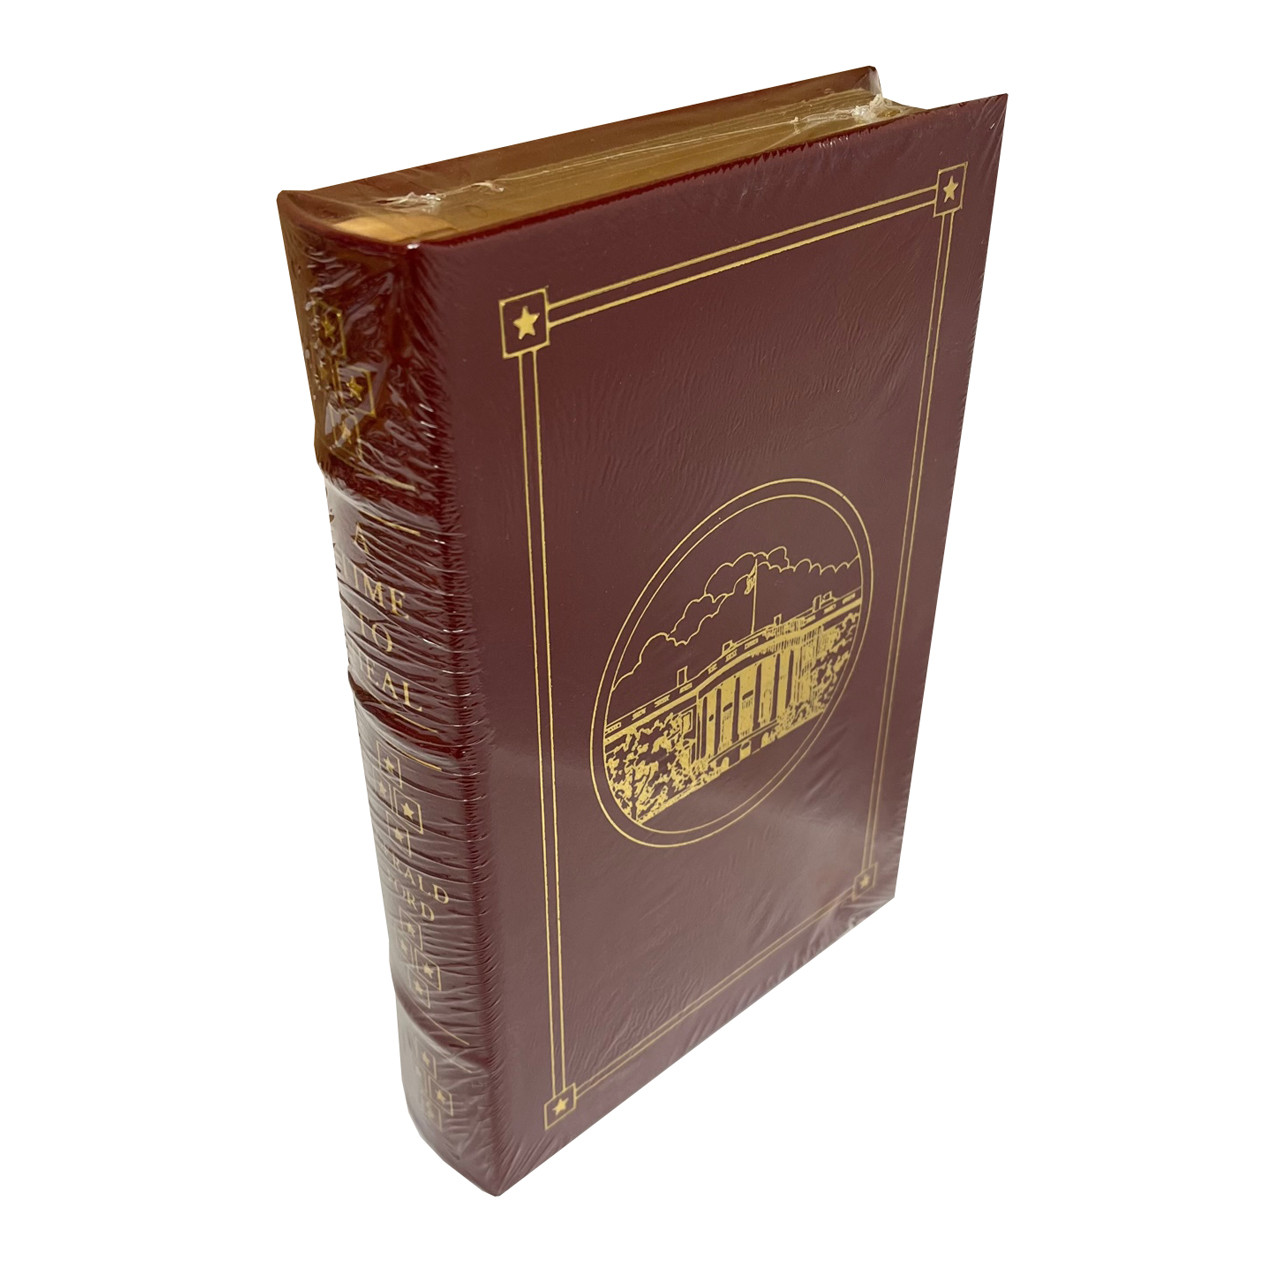 Gerald Ford  "A Time To Heal" Signed Limited Edition, Leather Bound Collector's Edition [Sealed]